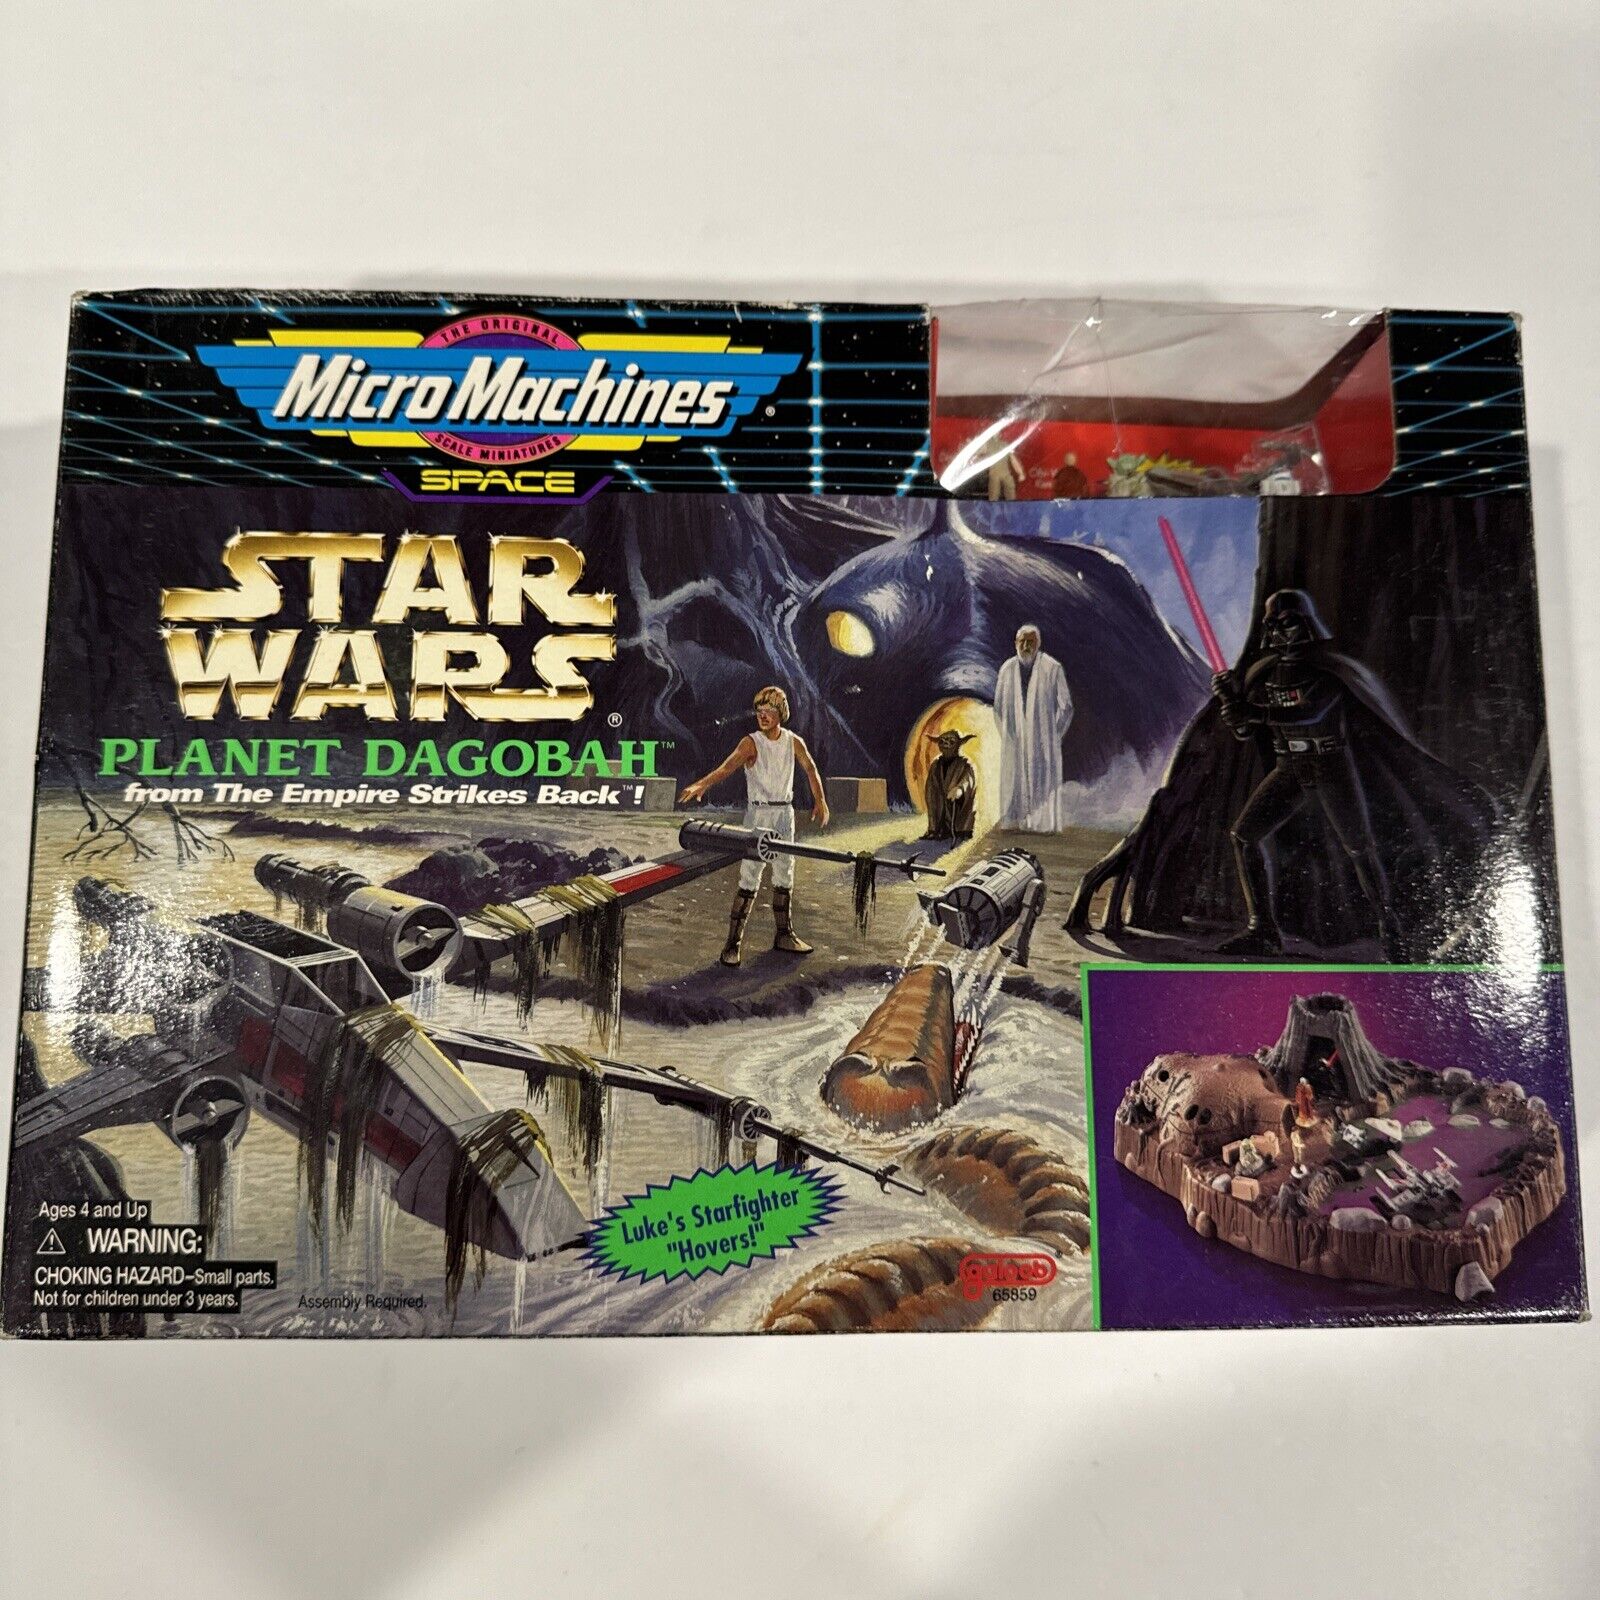 Micro Machines Star Wars Planet Dagobah Action Playset Galoob 1994 Opened